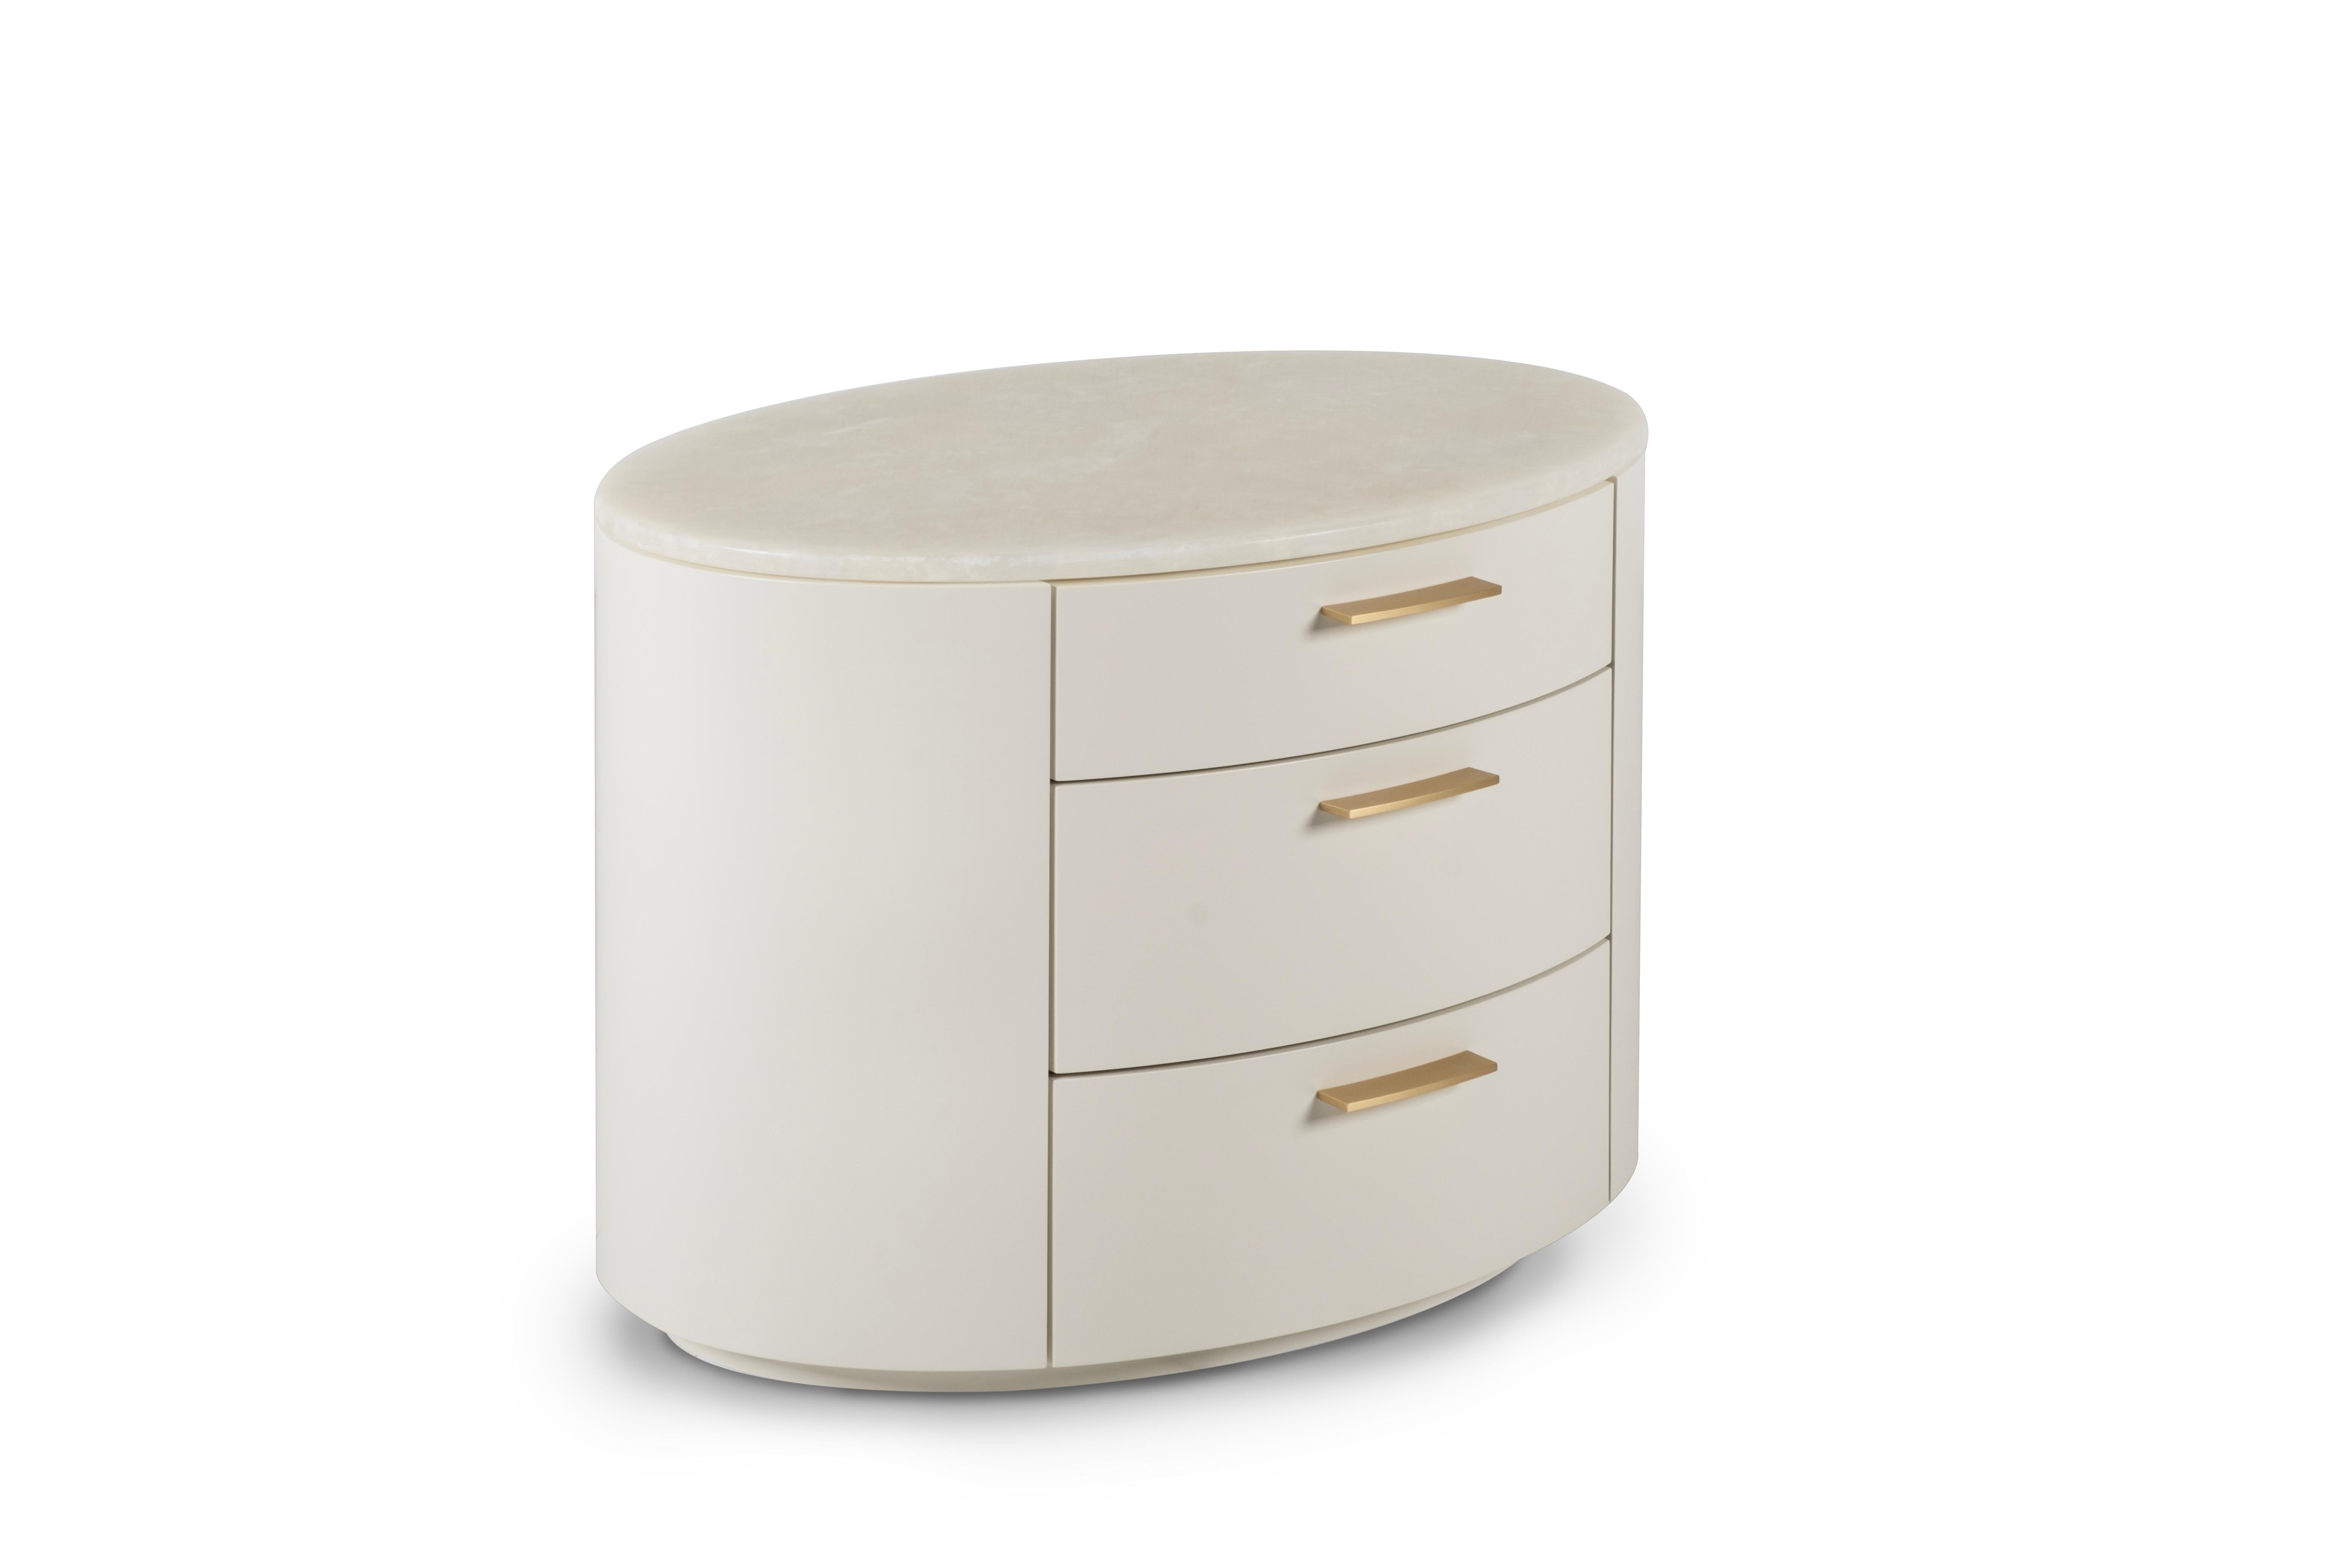 Brushed Modern Nilo Nightstands Bedside Tables White Onyx Handmade Portugal Greenapple For Sale